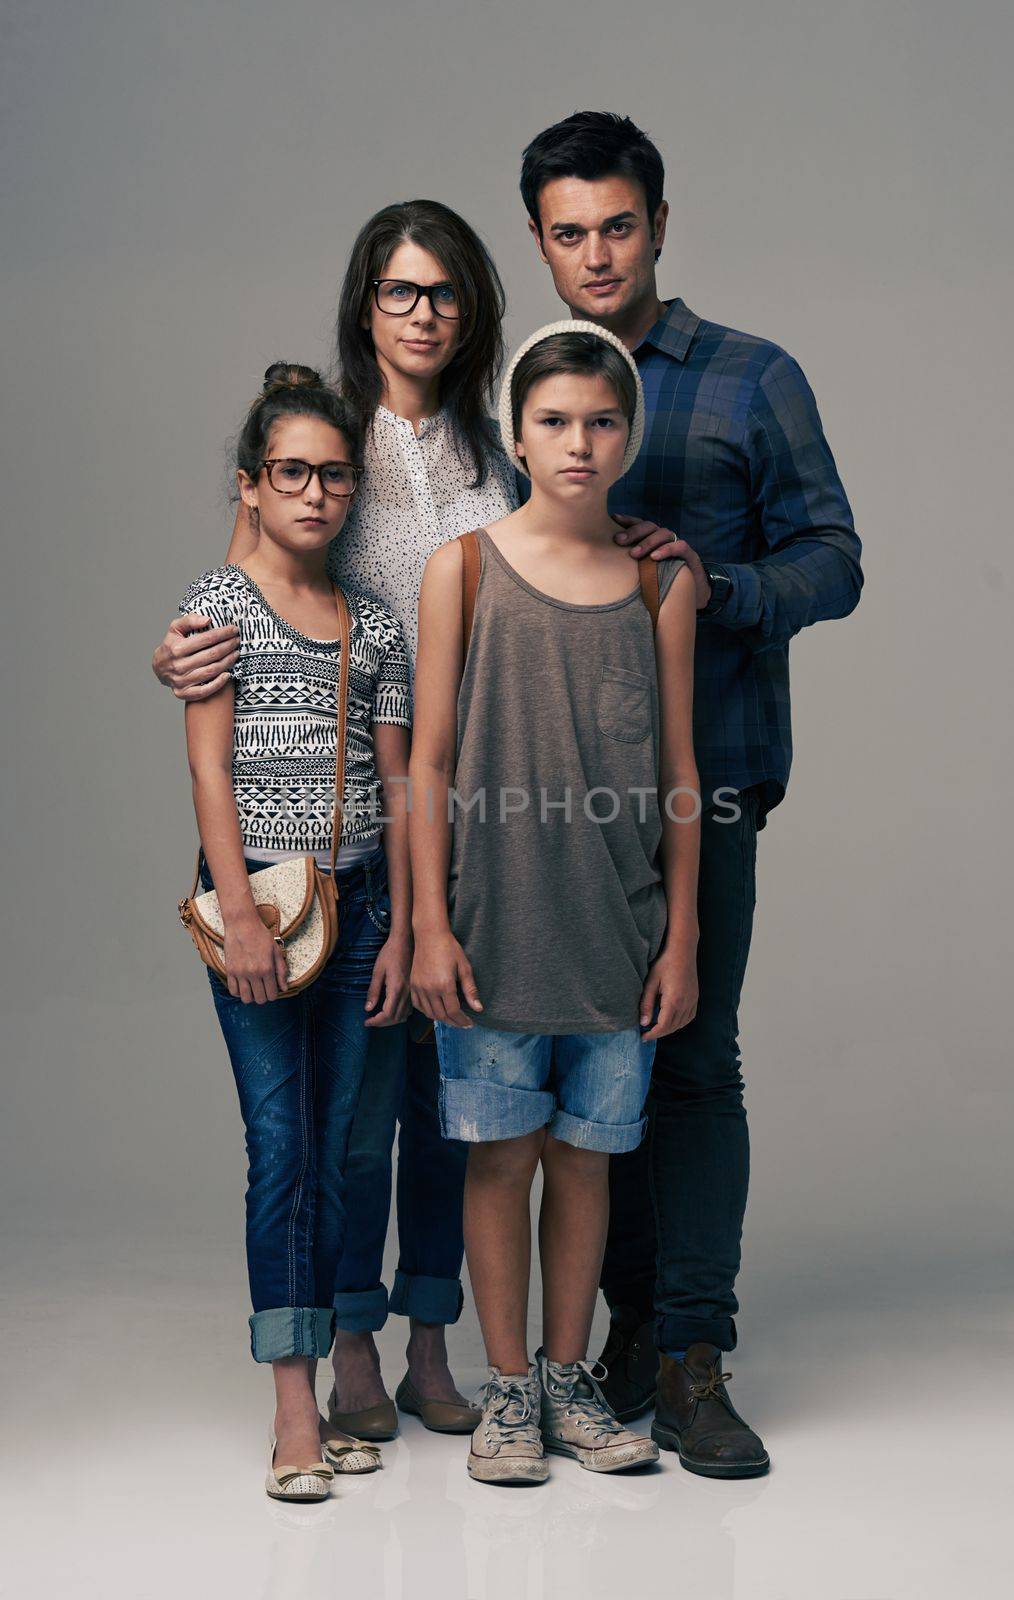 Who says family cant be trendy. Studio shot of trendy young family against a gray background. by YuriArcurs